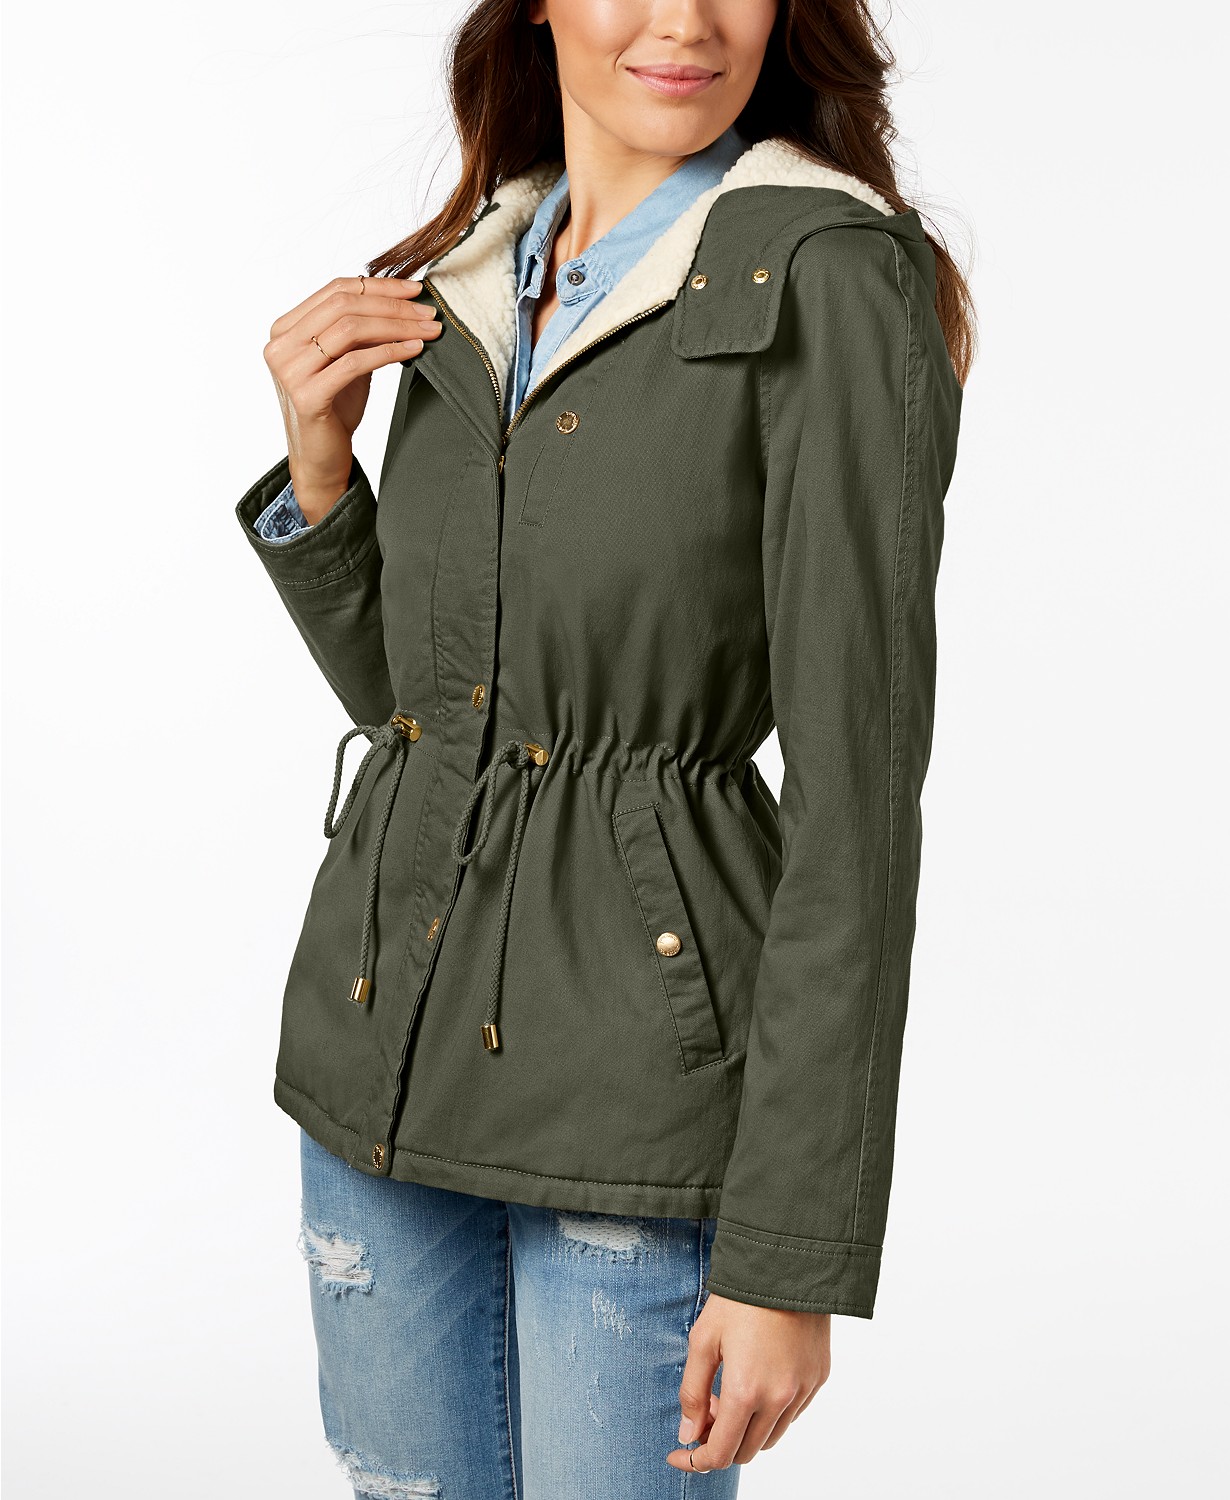 woocommerce-673321-2209615.cloudwaysapps.com-collection-b-womens-green-faux-fur-lined-anorak-coat